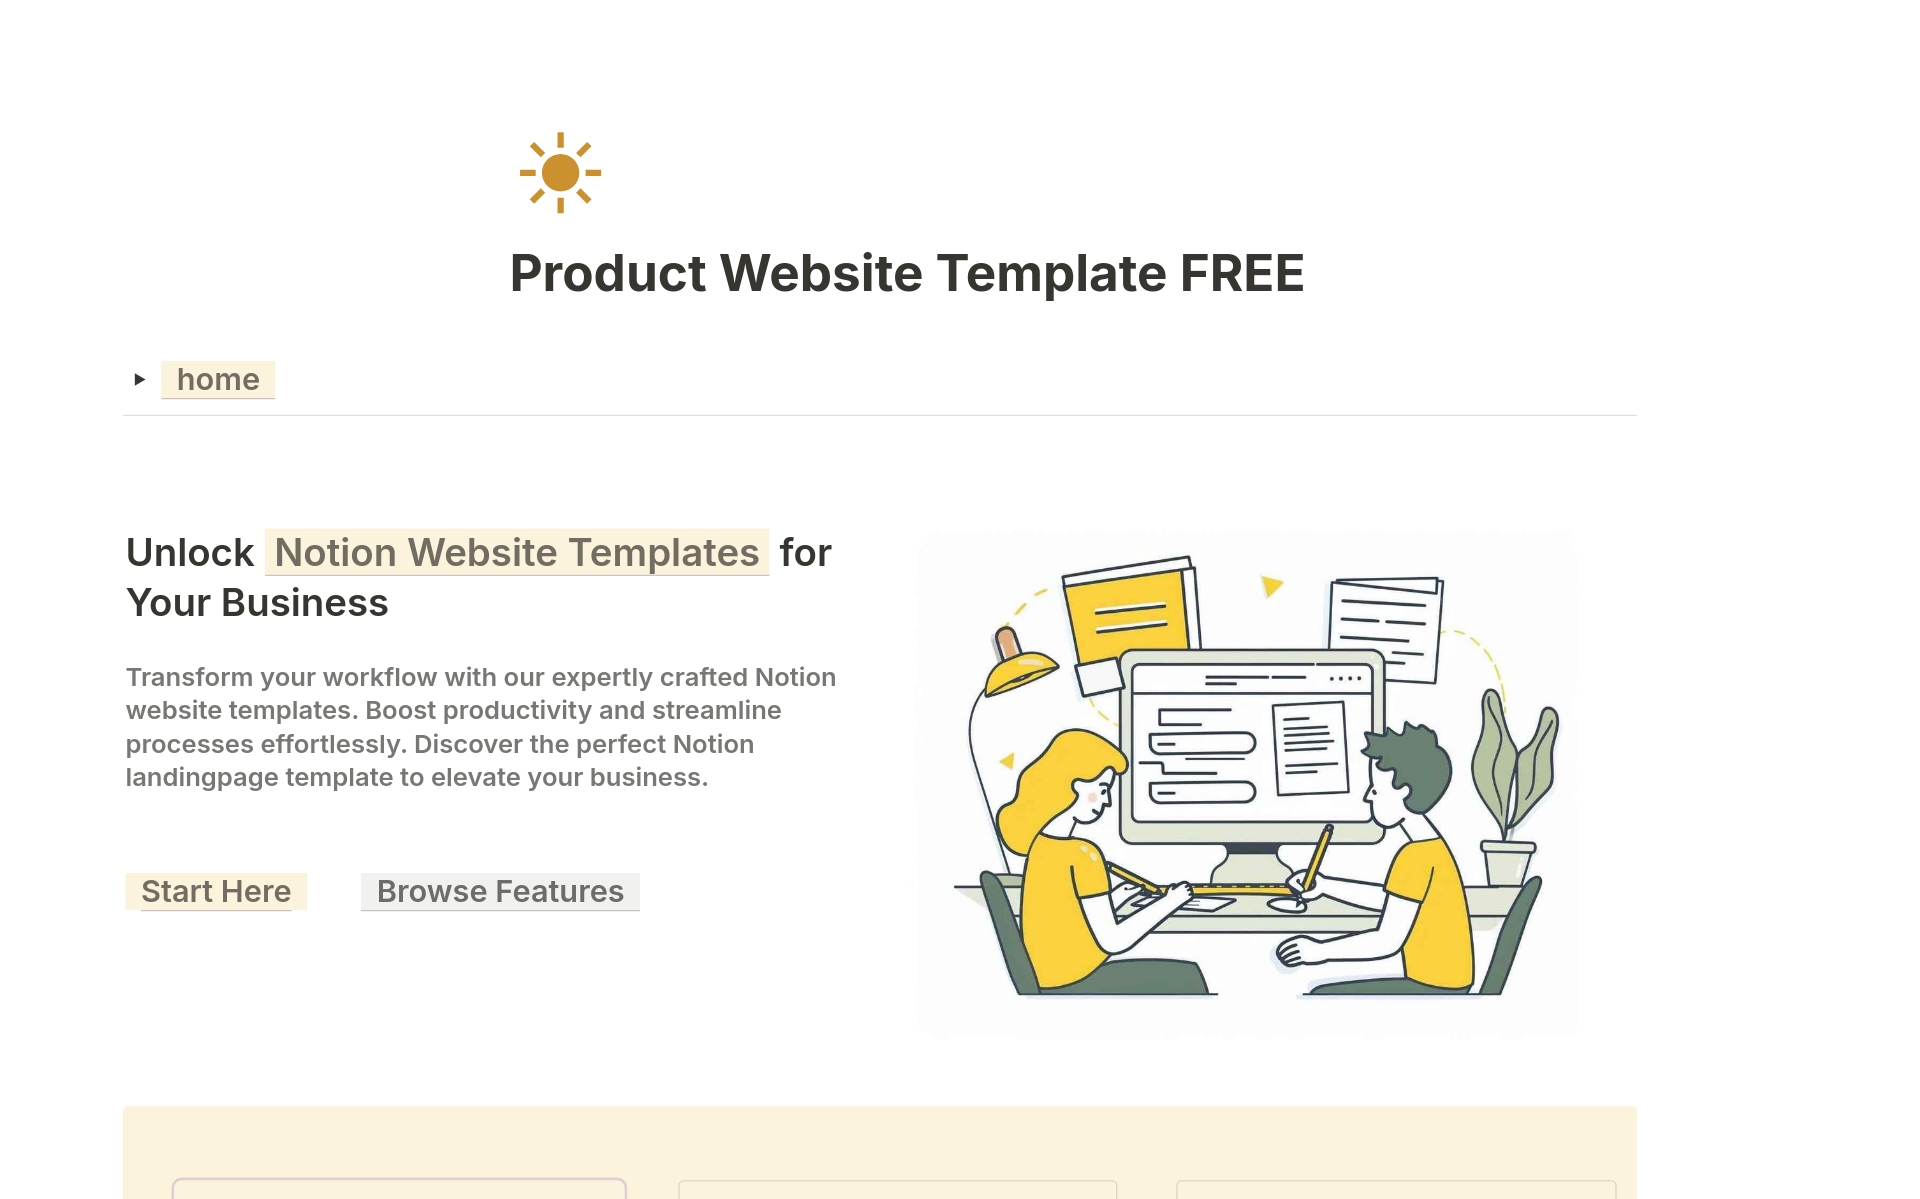 FREE Notion Product Website Template, to quickly and easily setup your own Notion powered landing page, product page or personal website. It has never been so simple to use Notion for your own websites, this template will give you an easy to customise professional website.